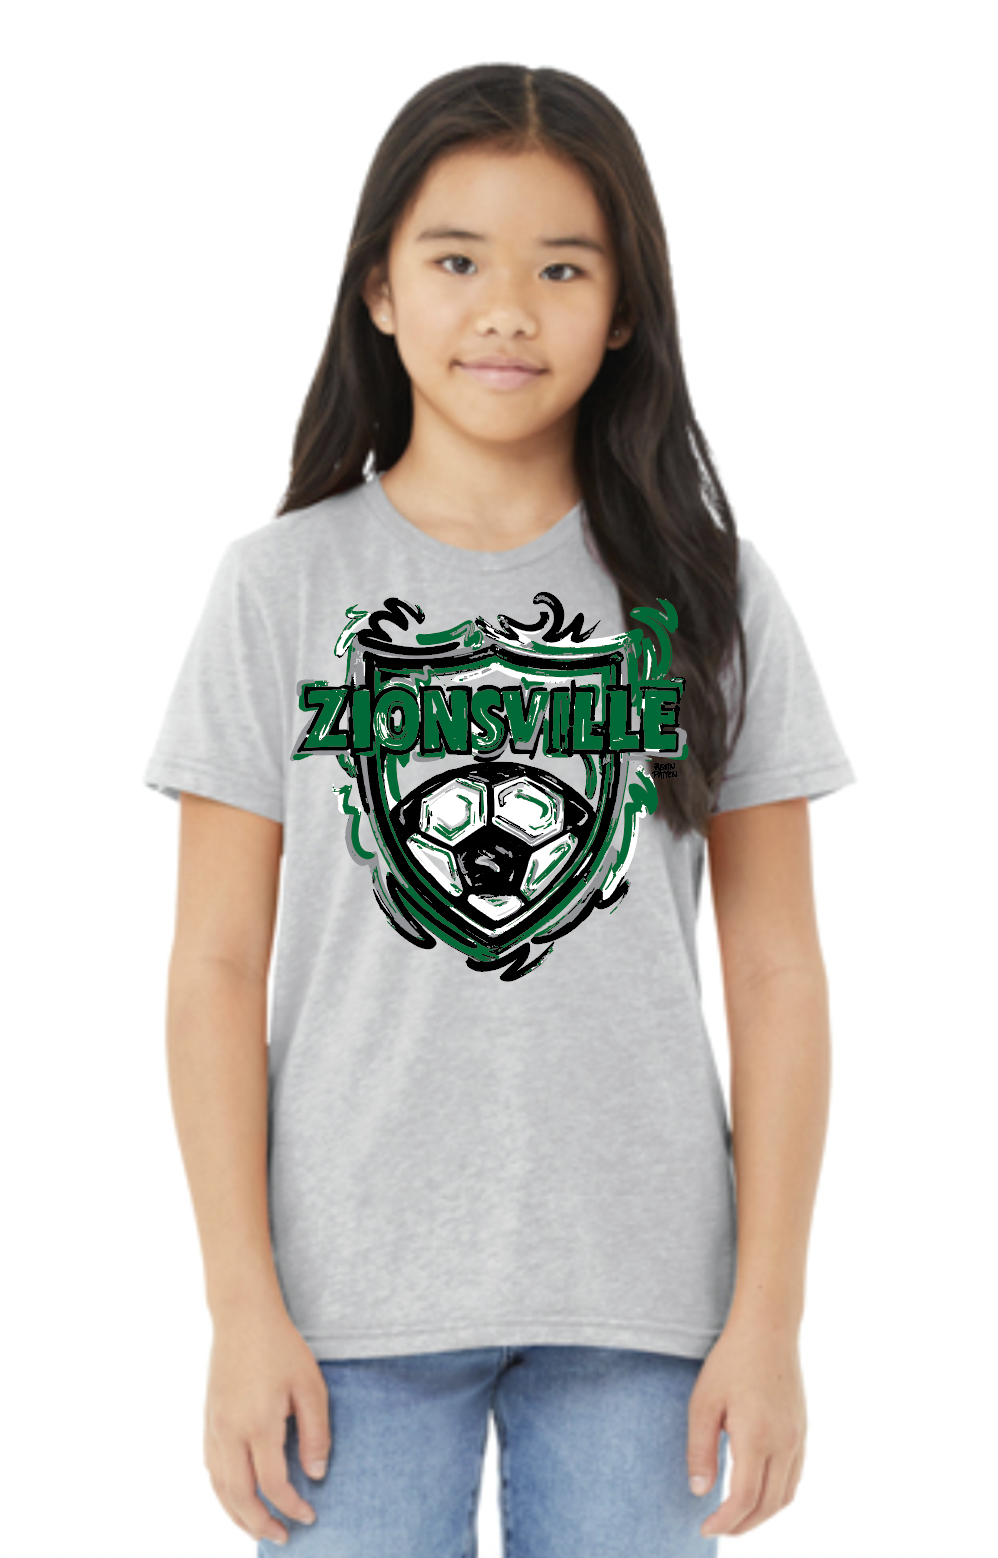 Zionsville Soccer Youth Tee by Justin Patten (2 Colors)